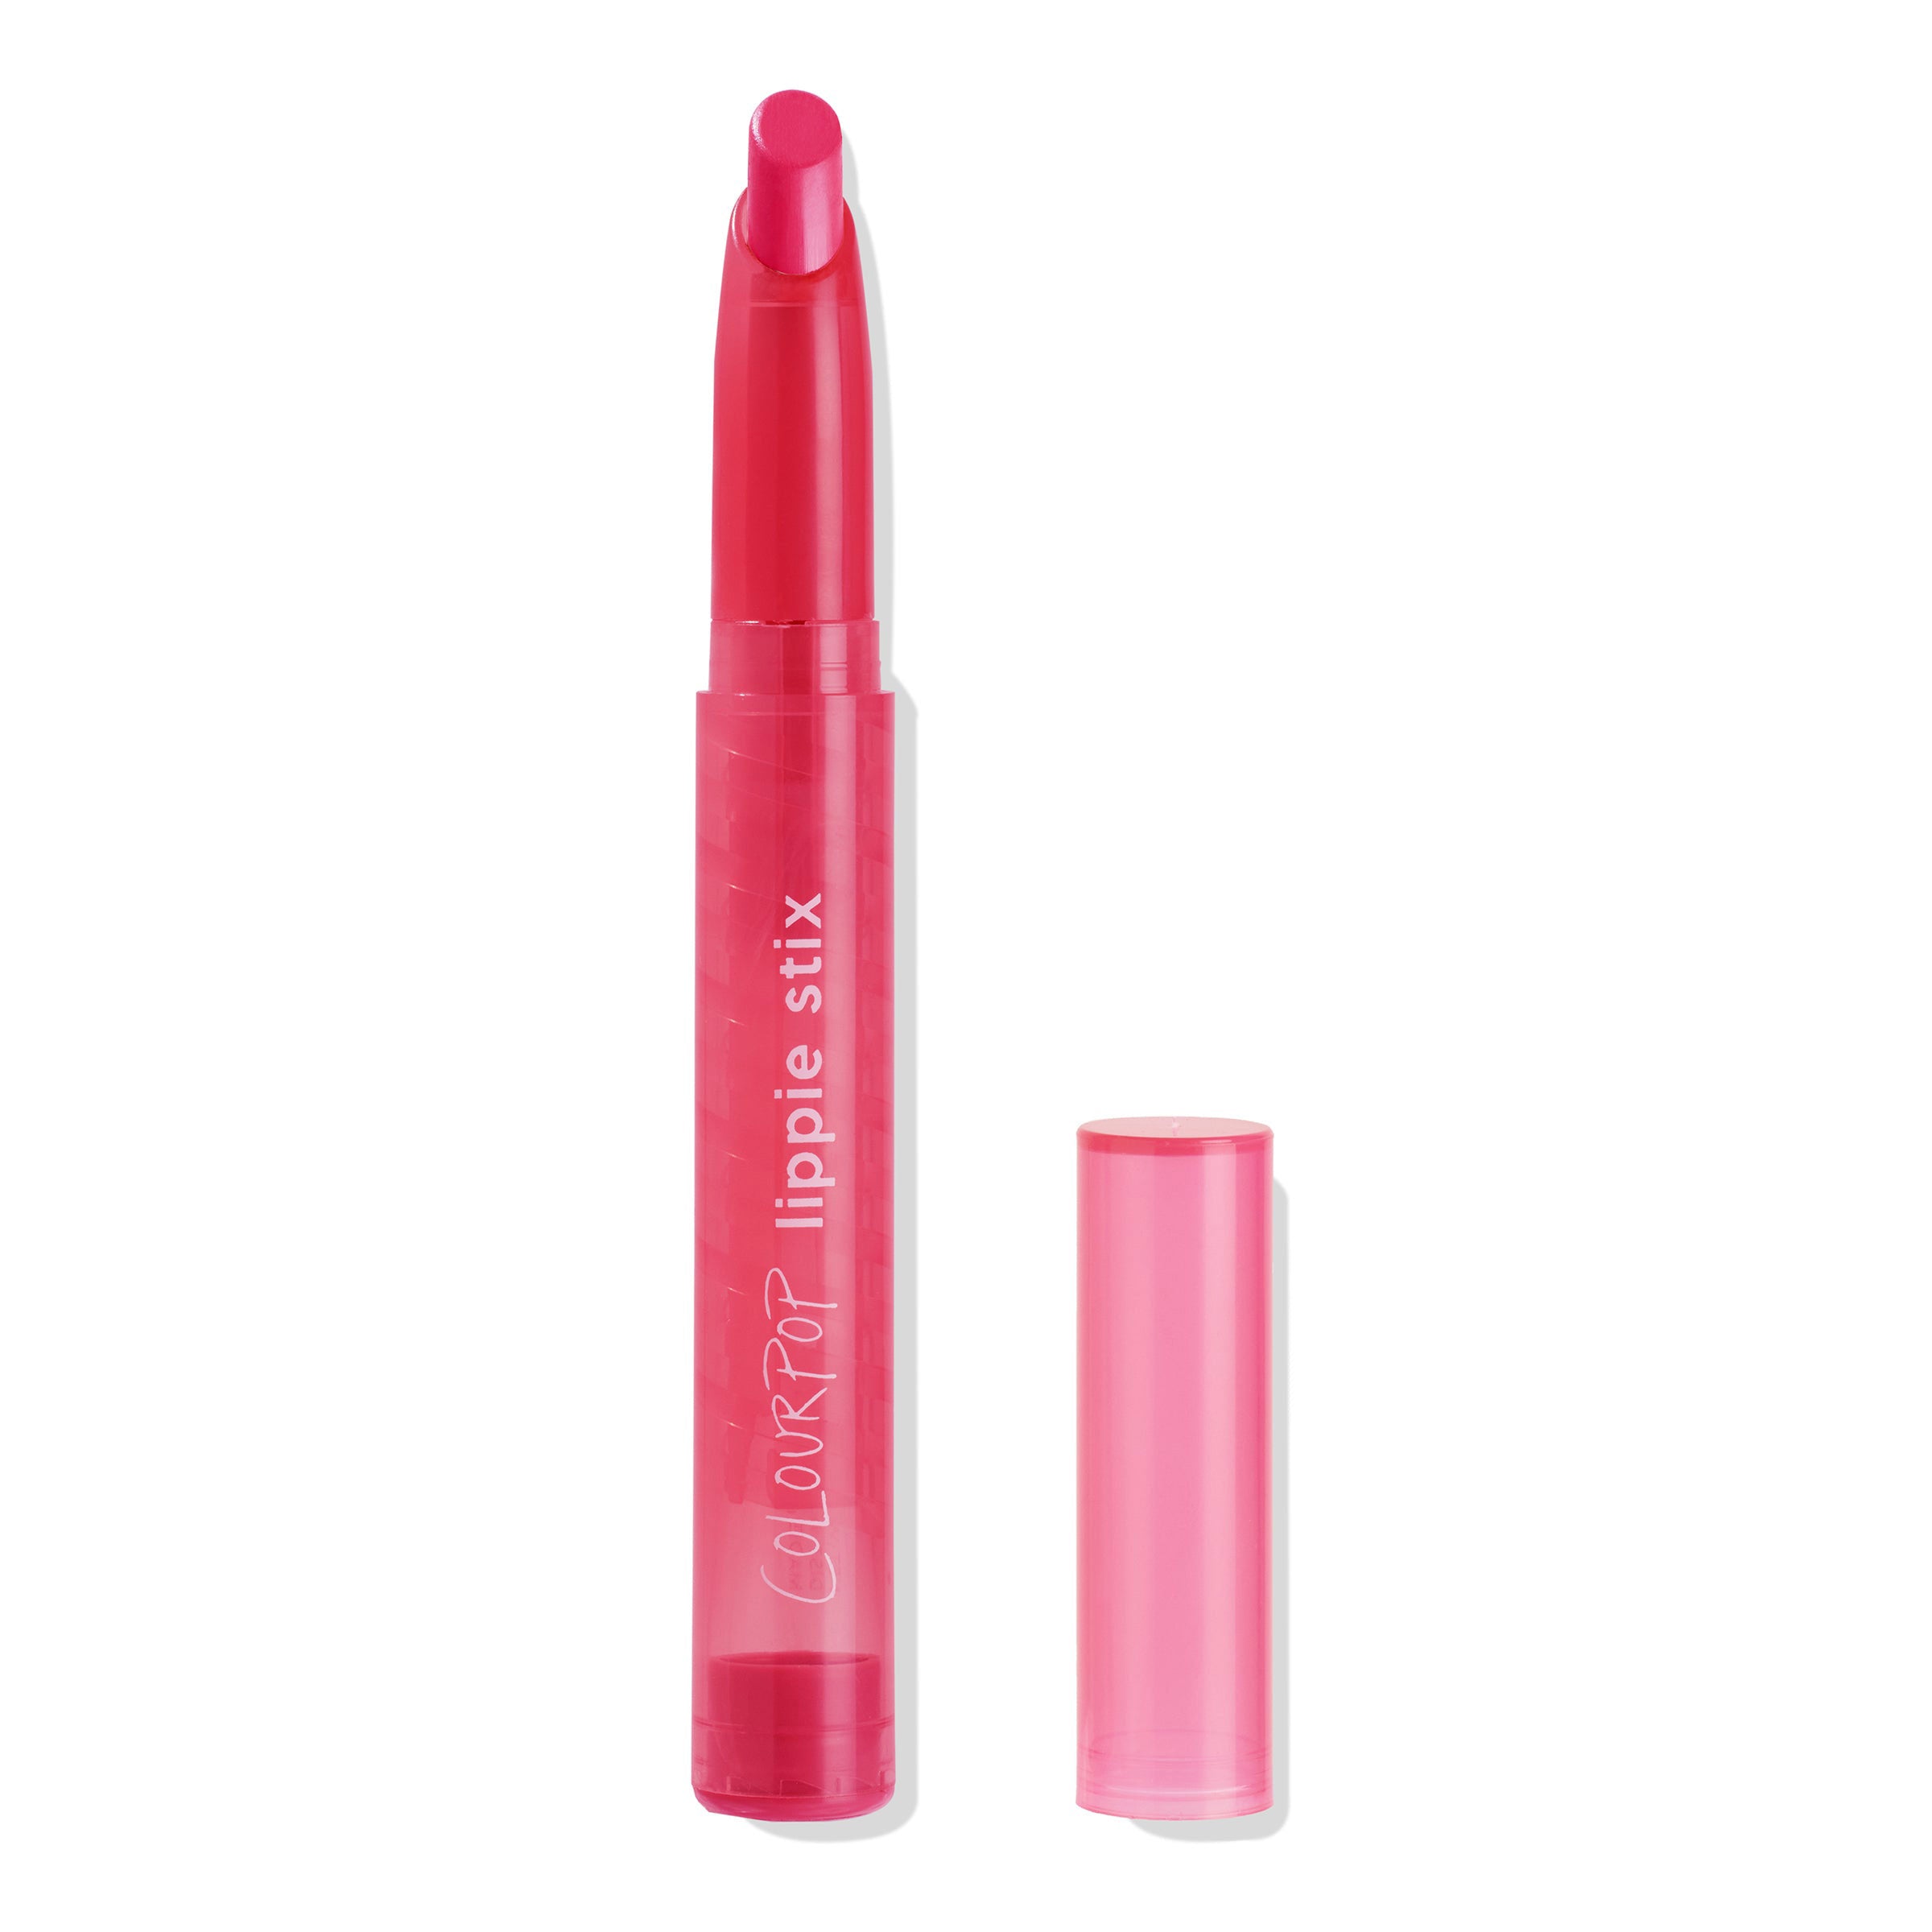 ColourPop Lippie Stix in Are You Surreal, a vibrant hot pink